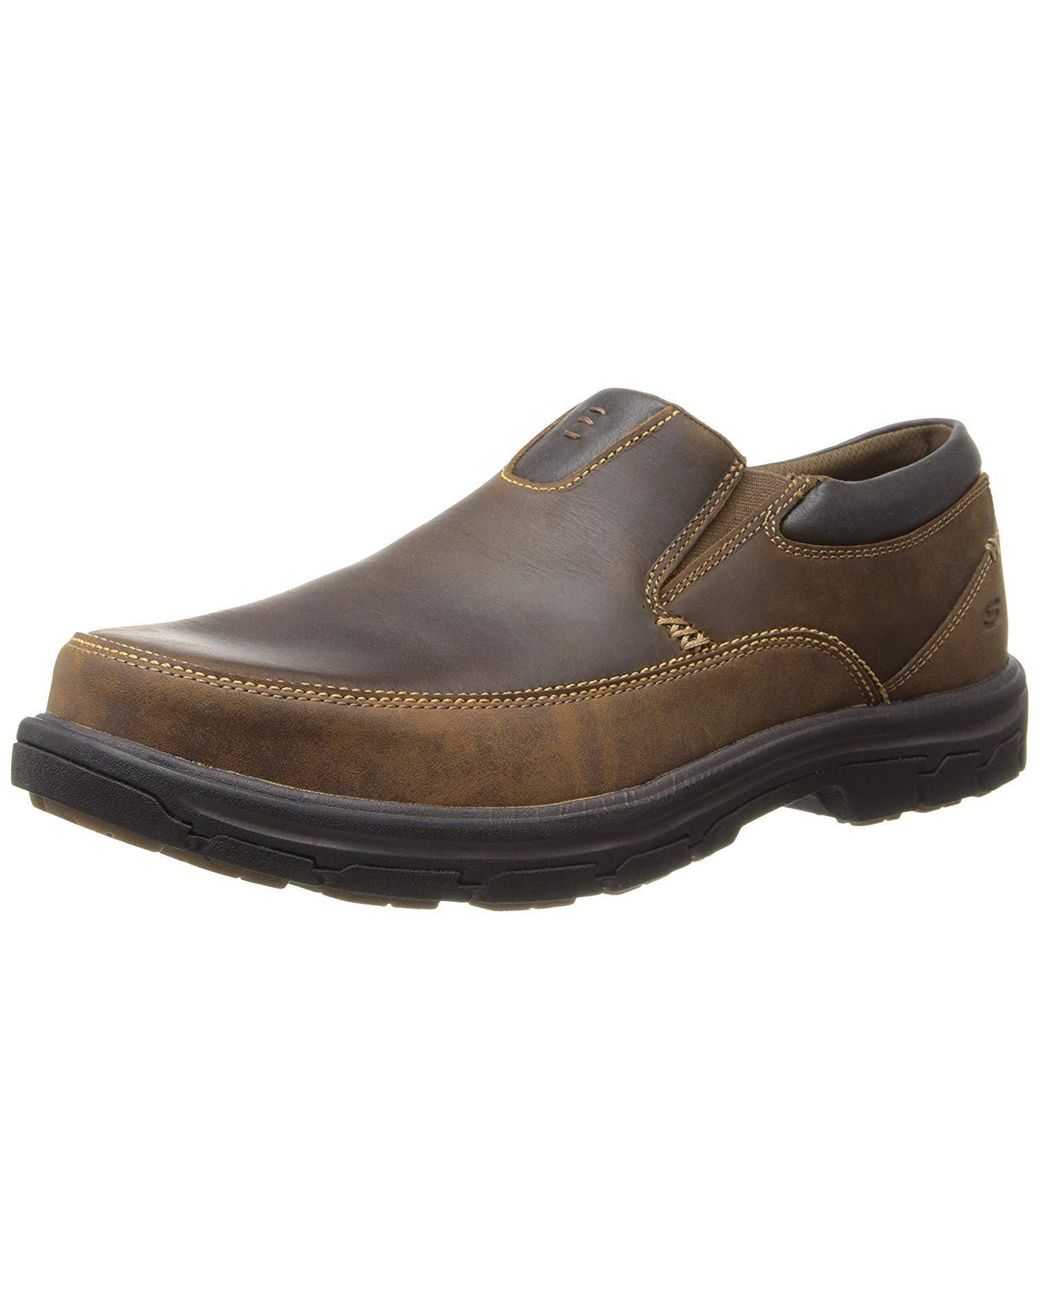 Skechers Usa Segment-the Search Slip-on Loafer,dark Brown,8 M Us for ...